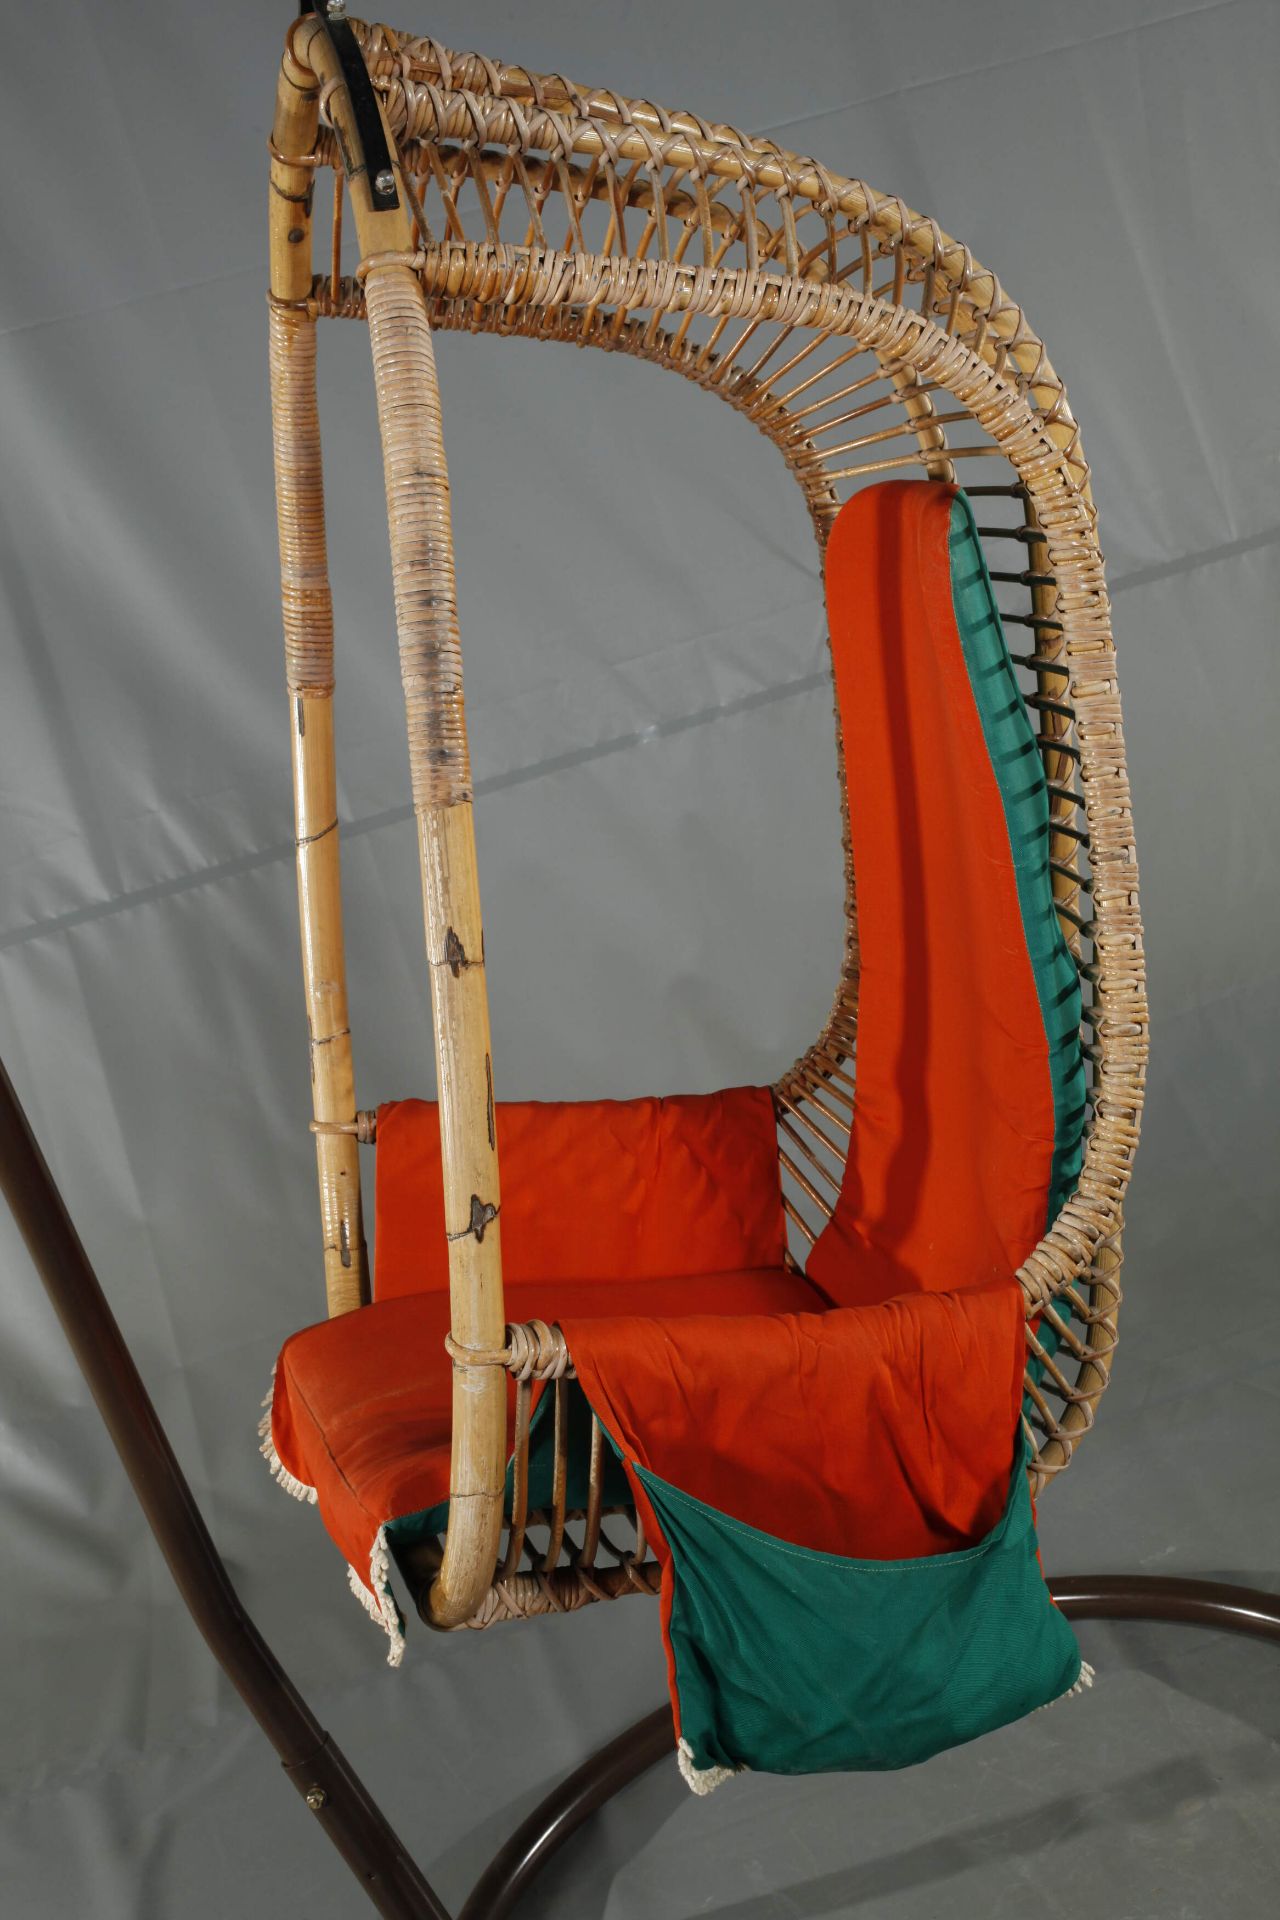 Swing chair - Image 2 of 3